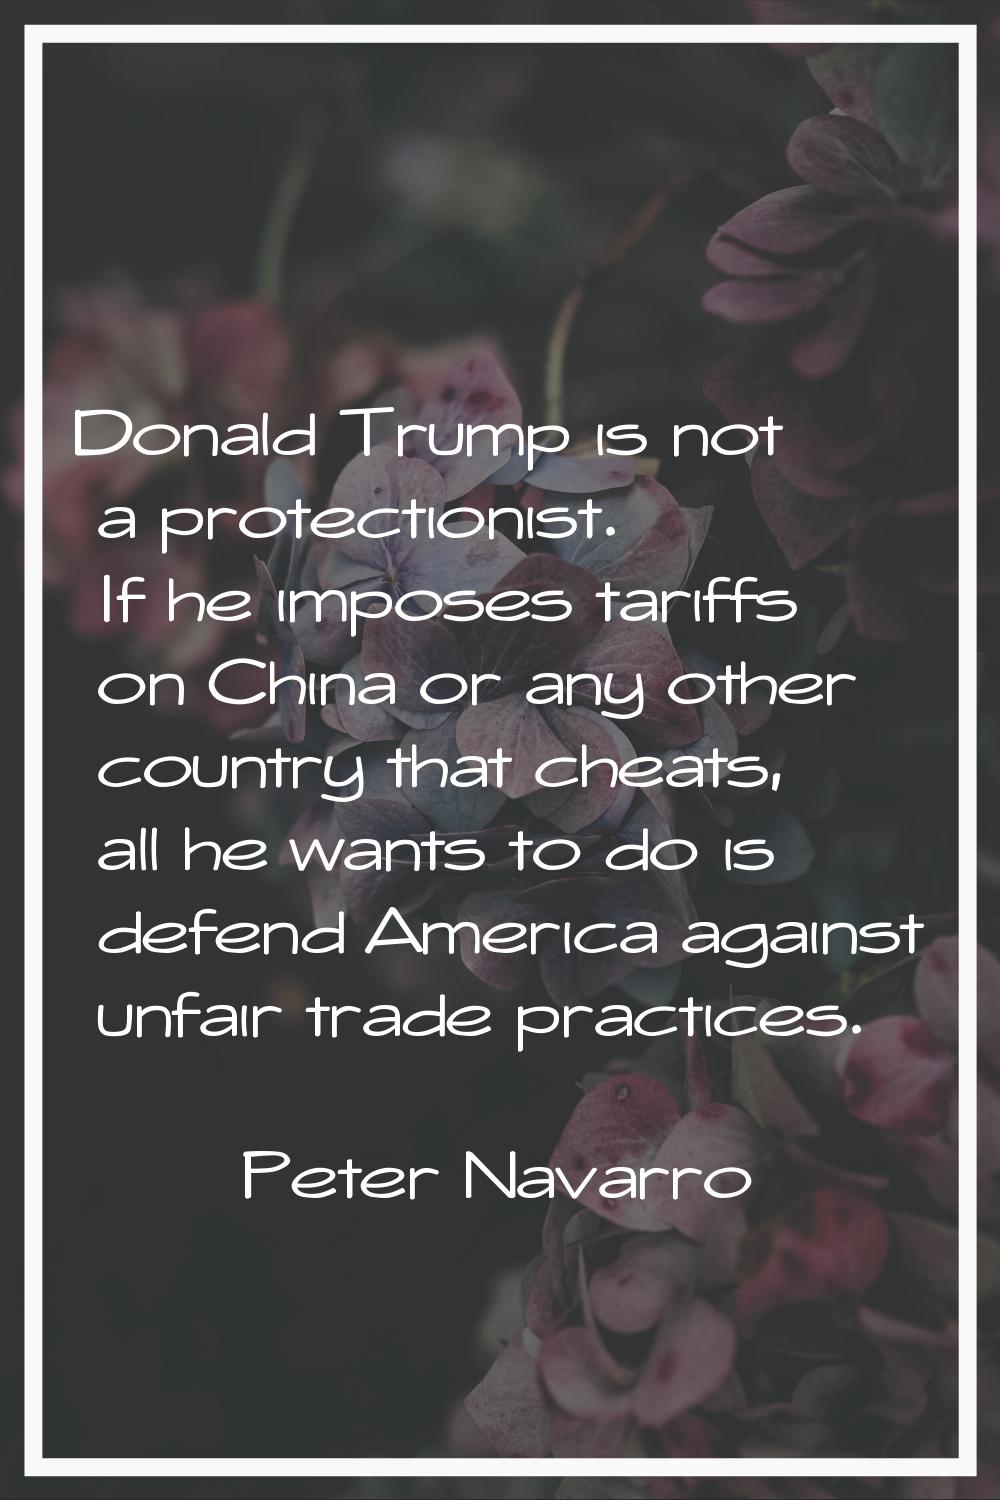 Donald Trump is not a protectionist. If he imposes tariffs on China or any other country that cheat